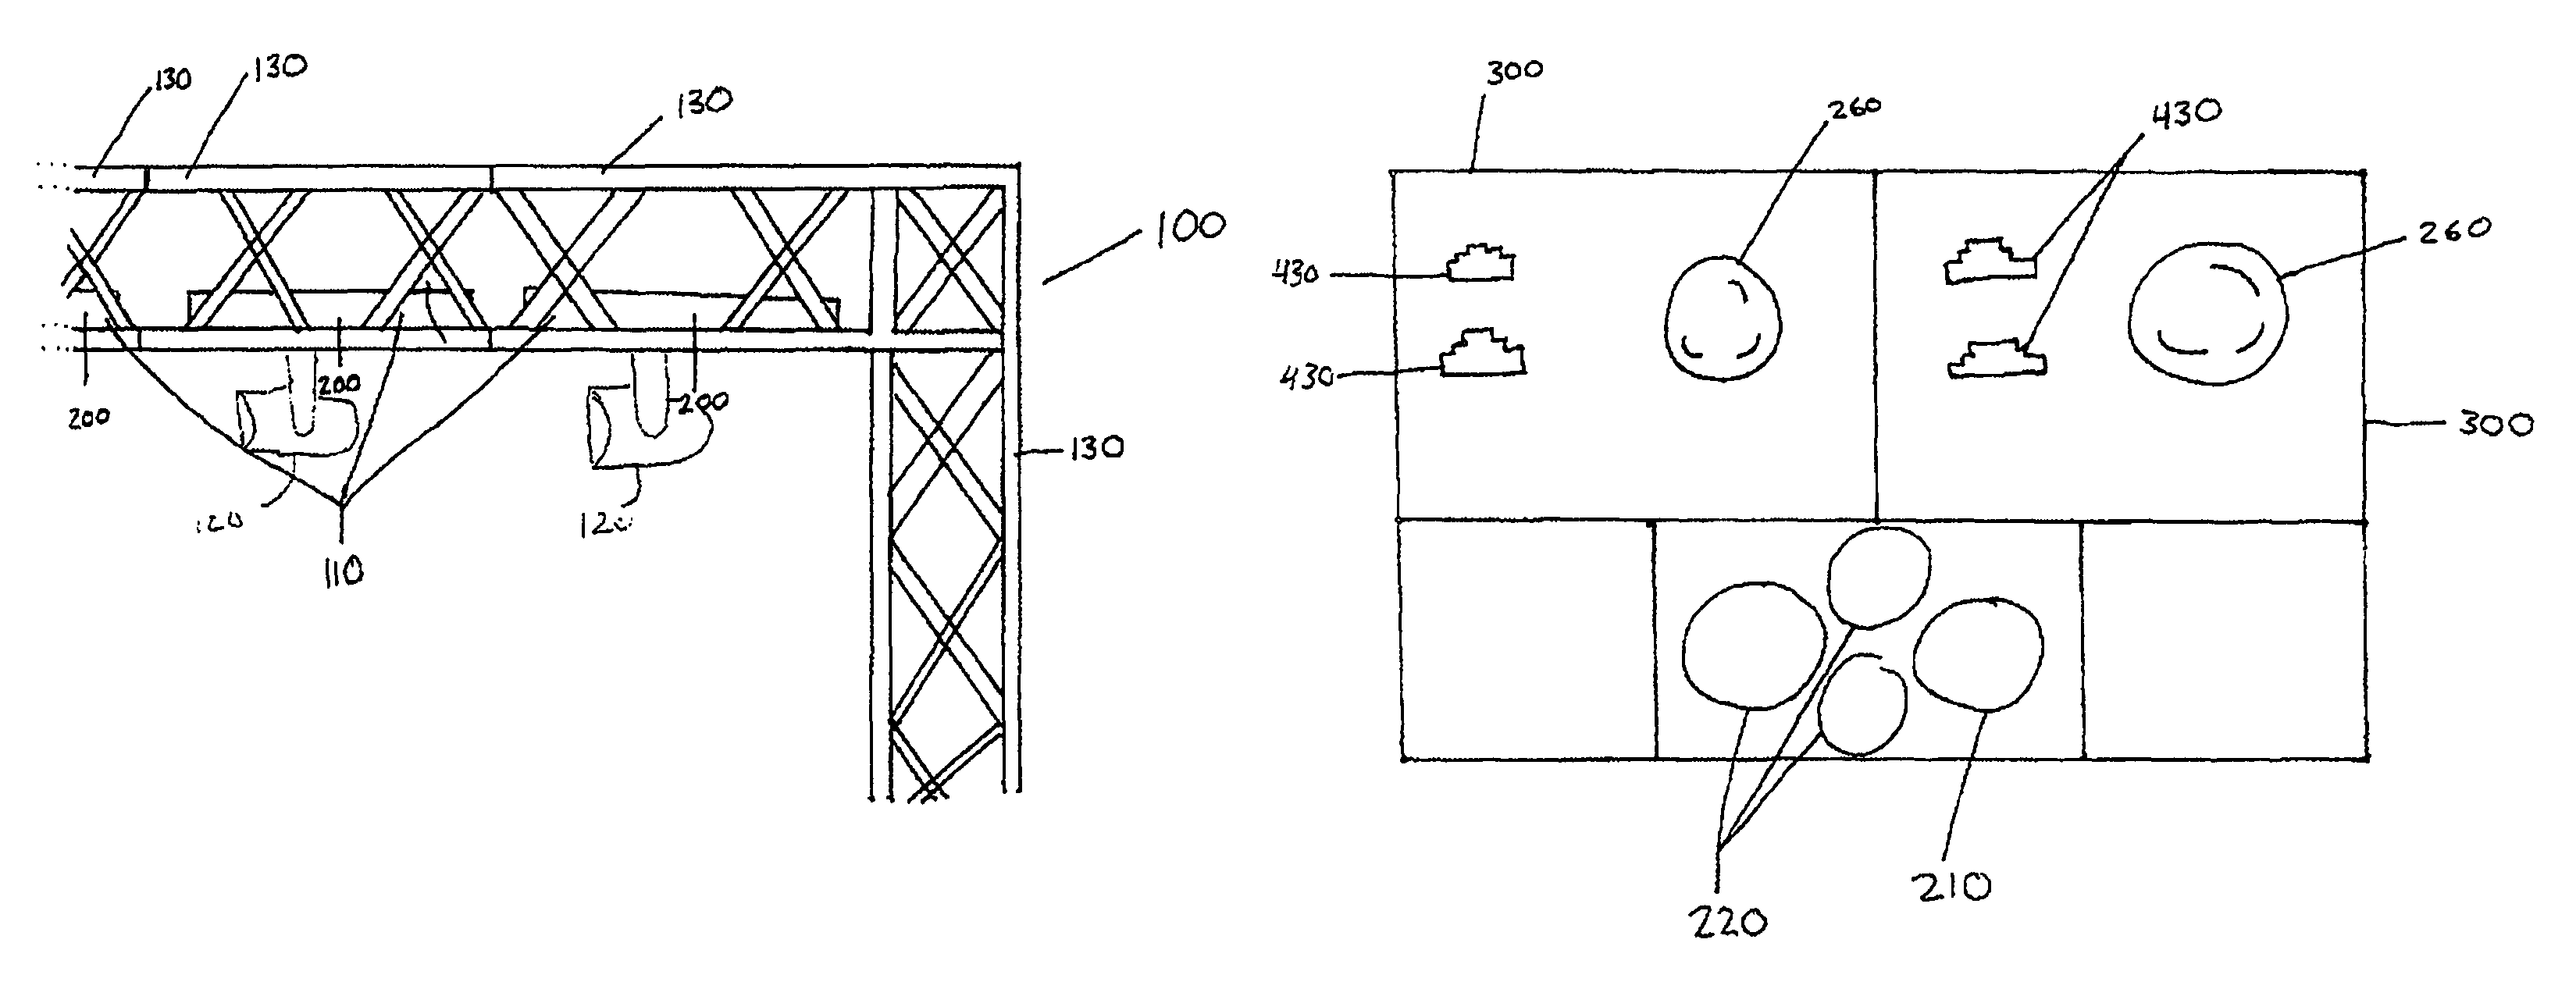 Systems and methods for distributing power and data in a lighting system